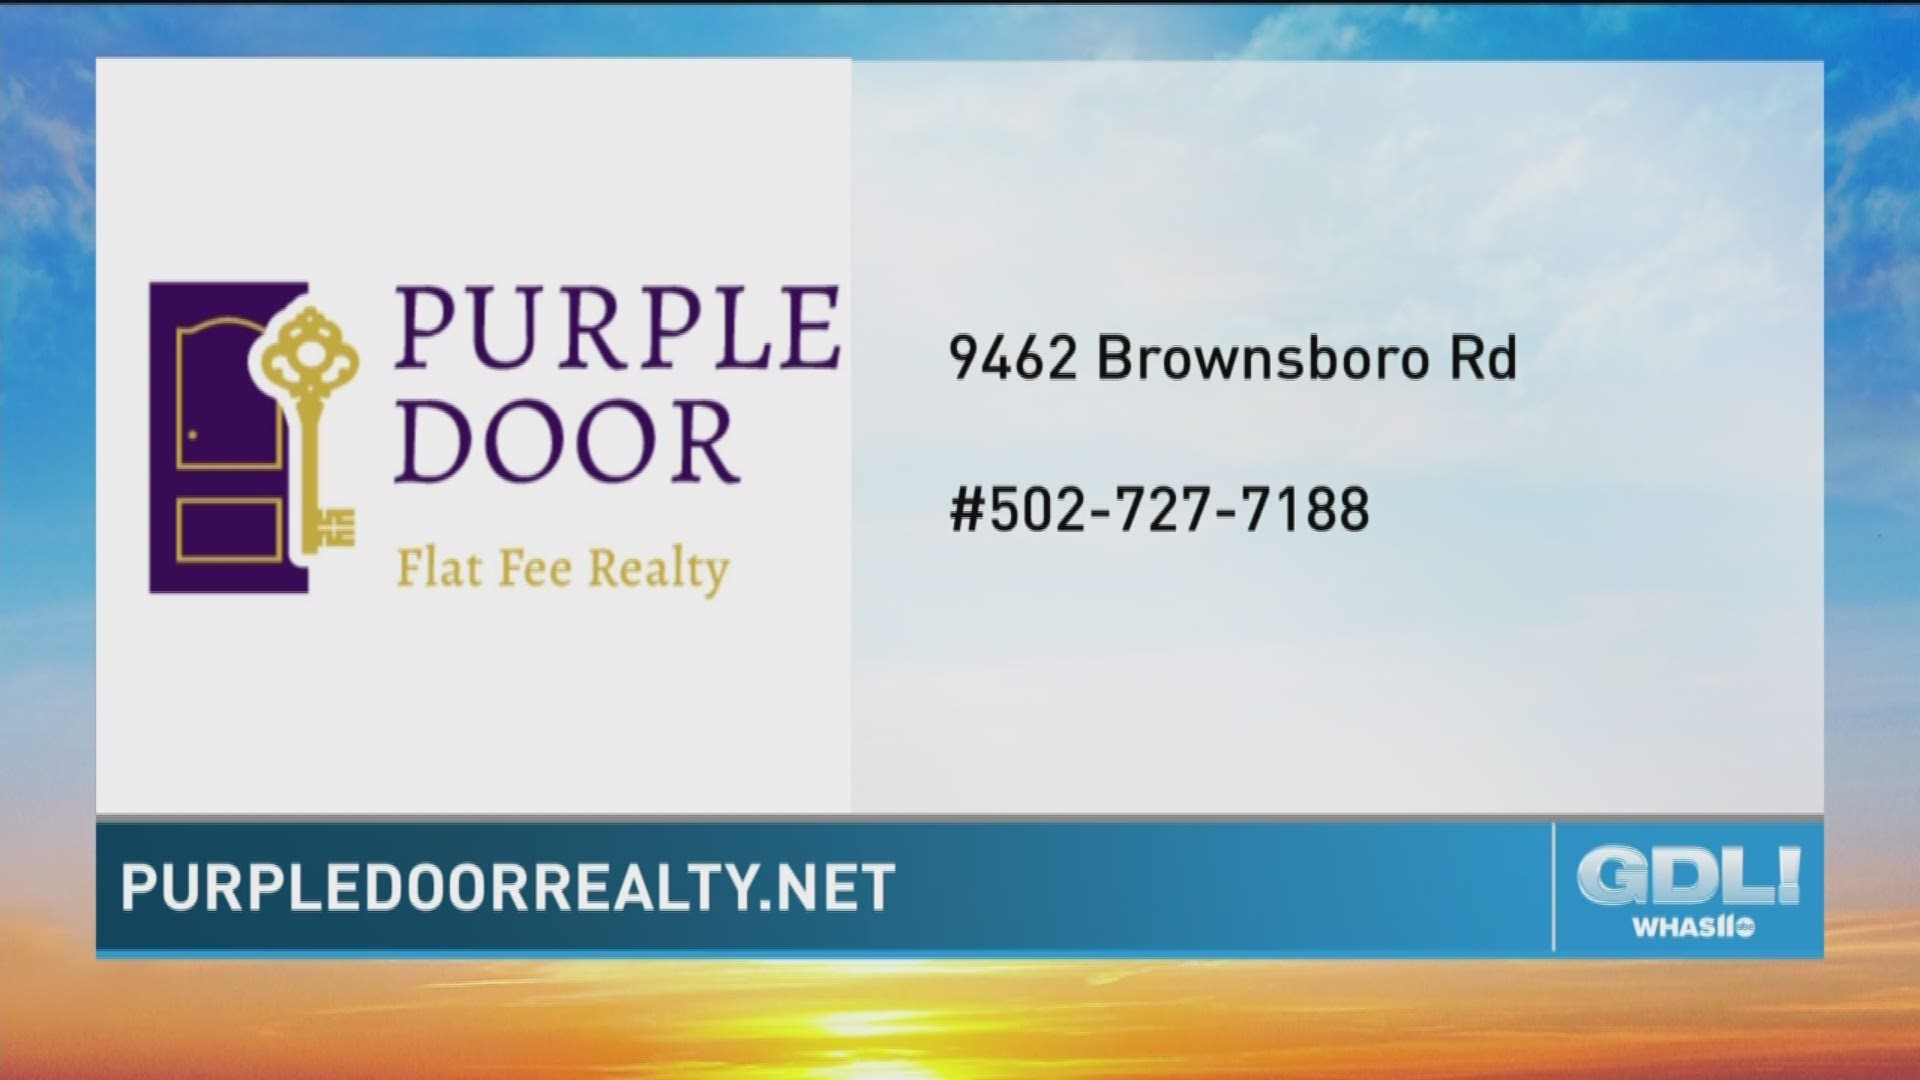 Buying or selling your home can cost thousands of dollars in fees and commissions. Purple Door Flat Fee Realty offers an alternative that can save you money.